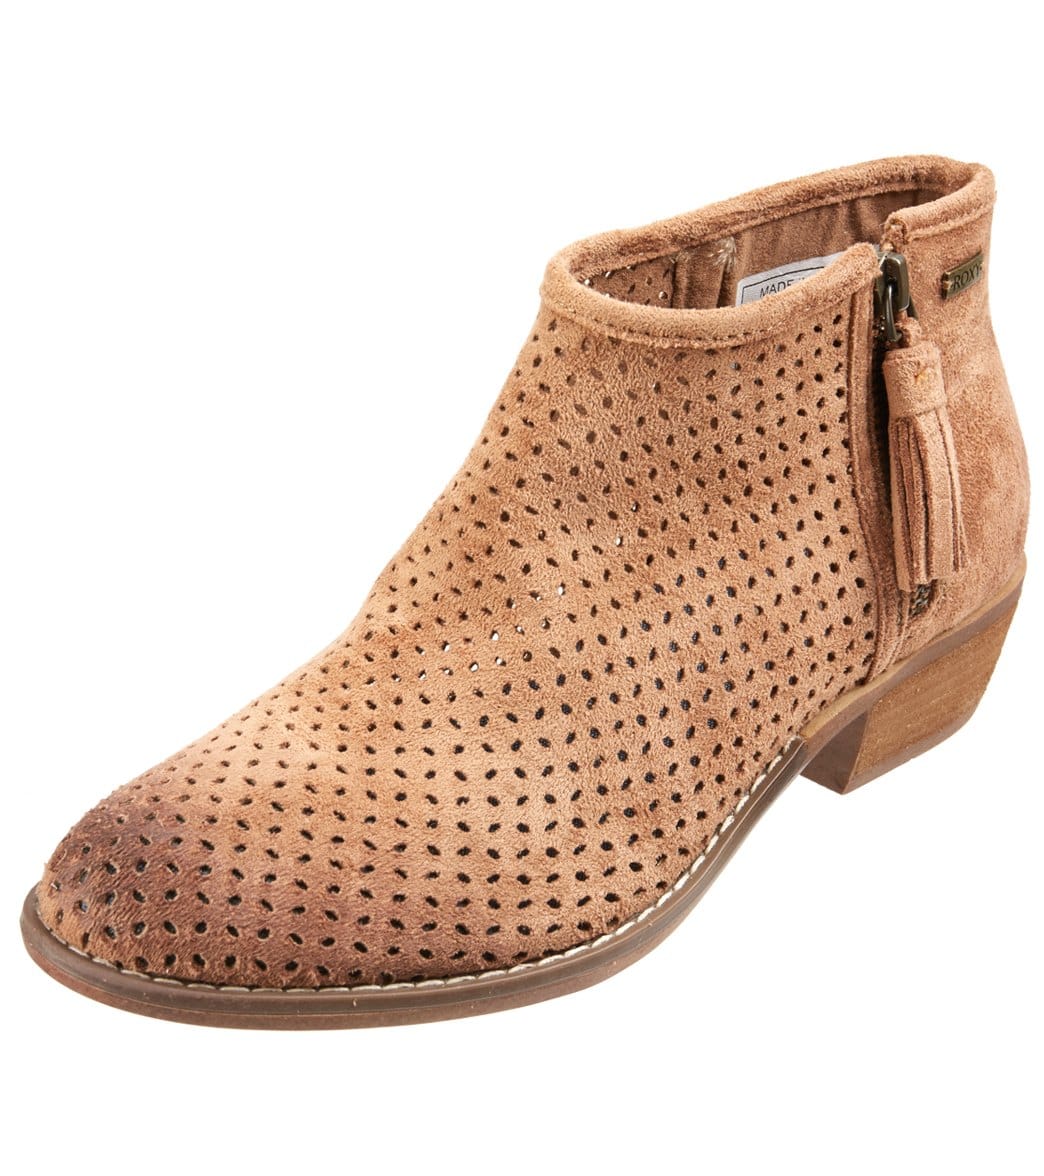 Roxy Women's Fuentes Boot at SwimOutlet.com - Free Shipping